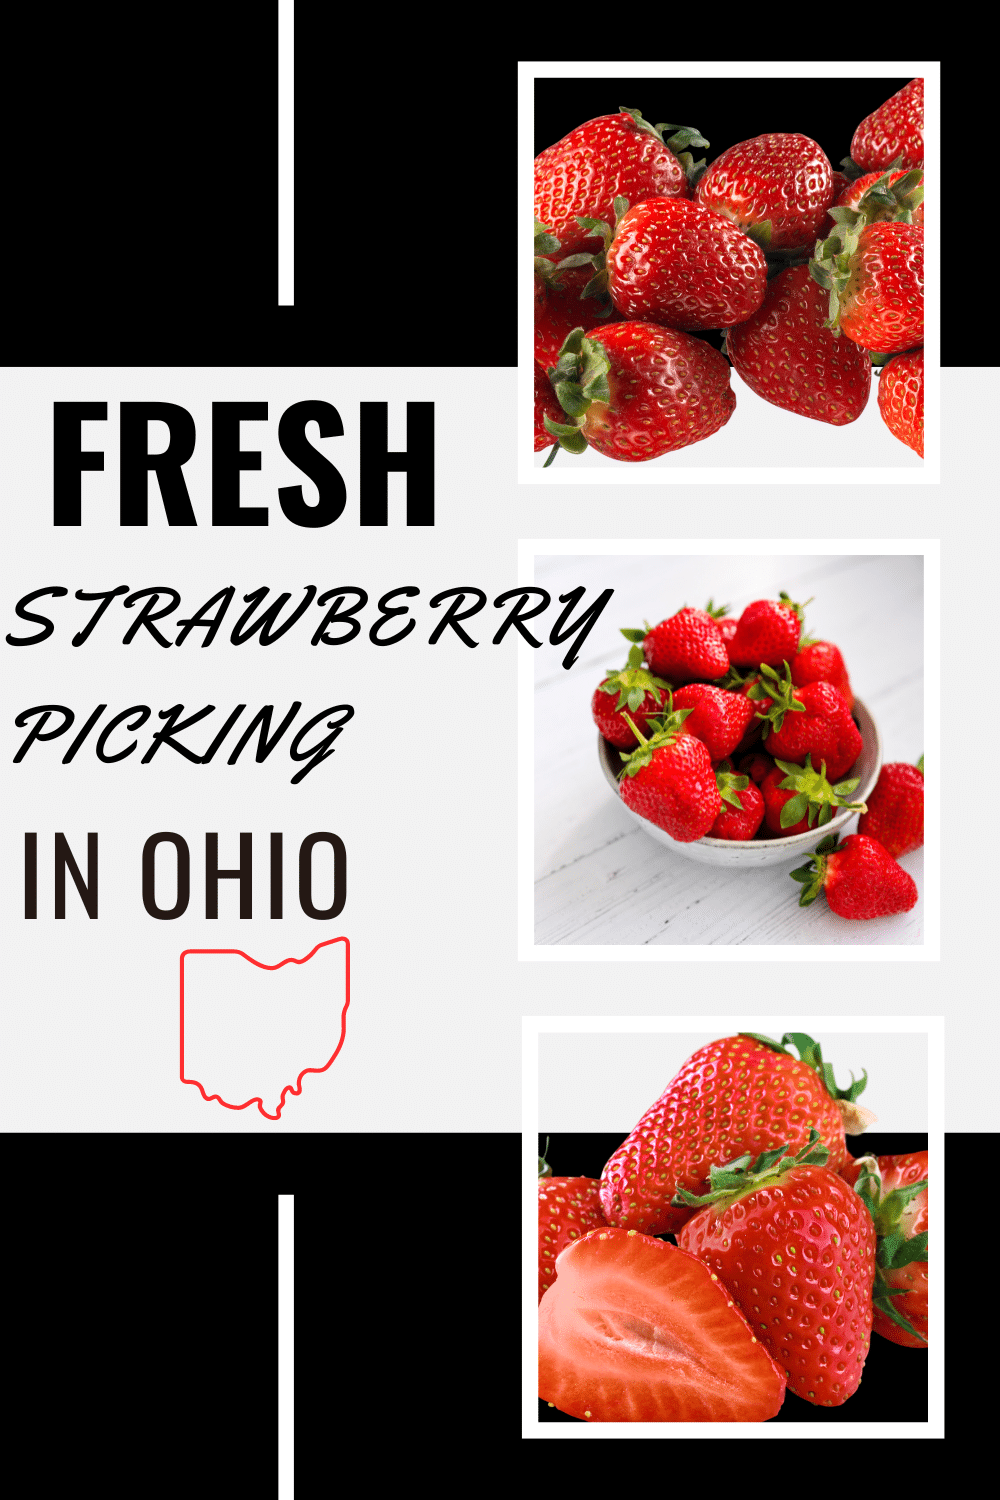 A collage of three images of strawberries. Text overlay says fresh strawberry picking in ohio